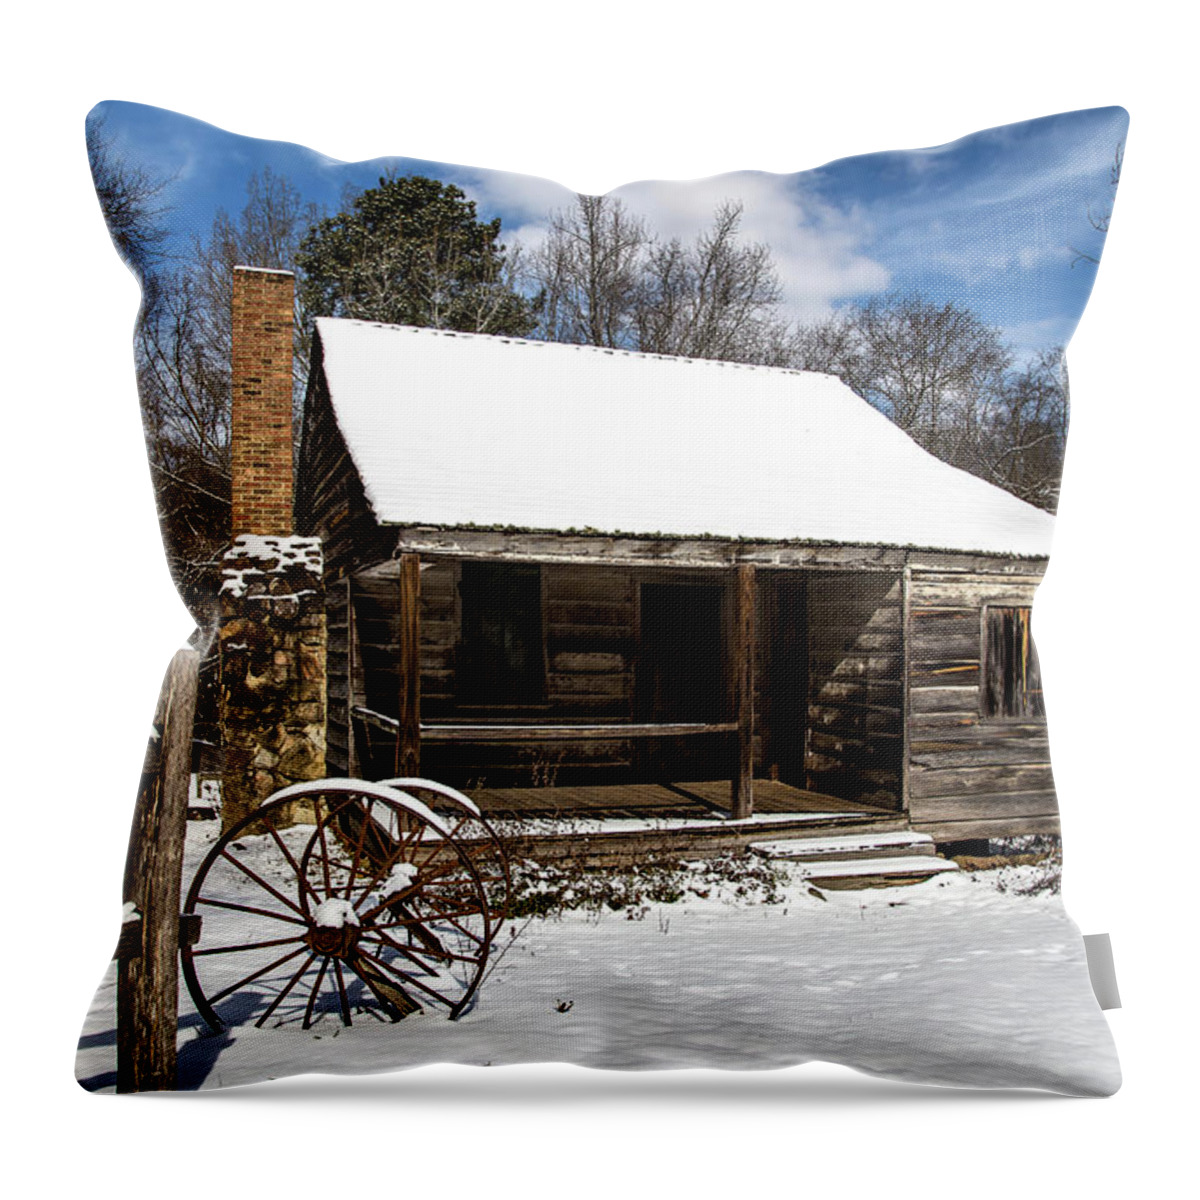 2014 Throw Pillow featuring the photograph Brickworks 29 by Charles Hite